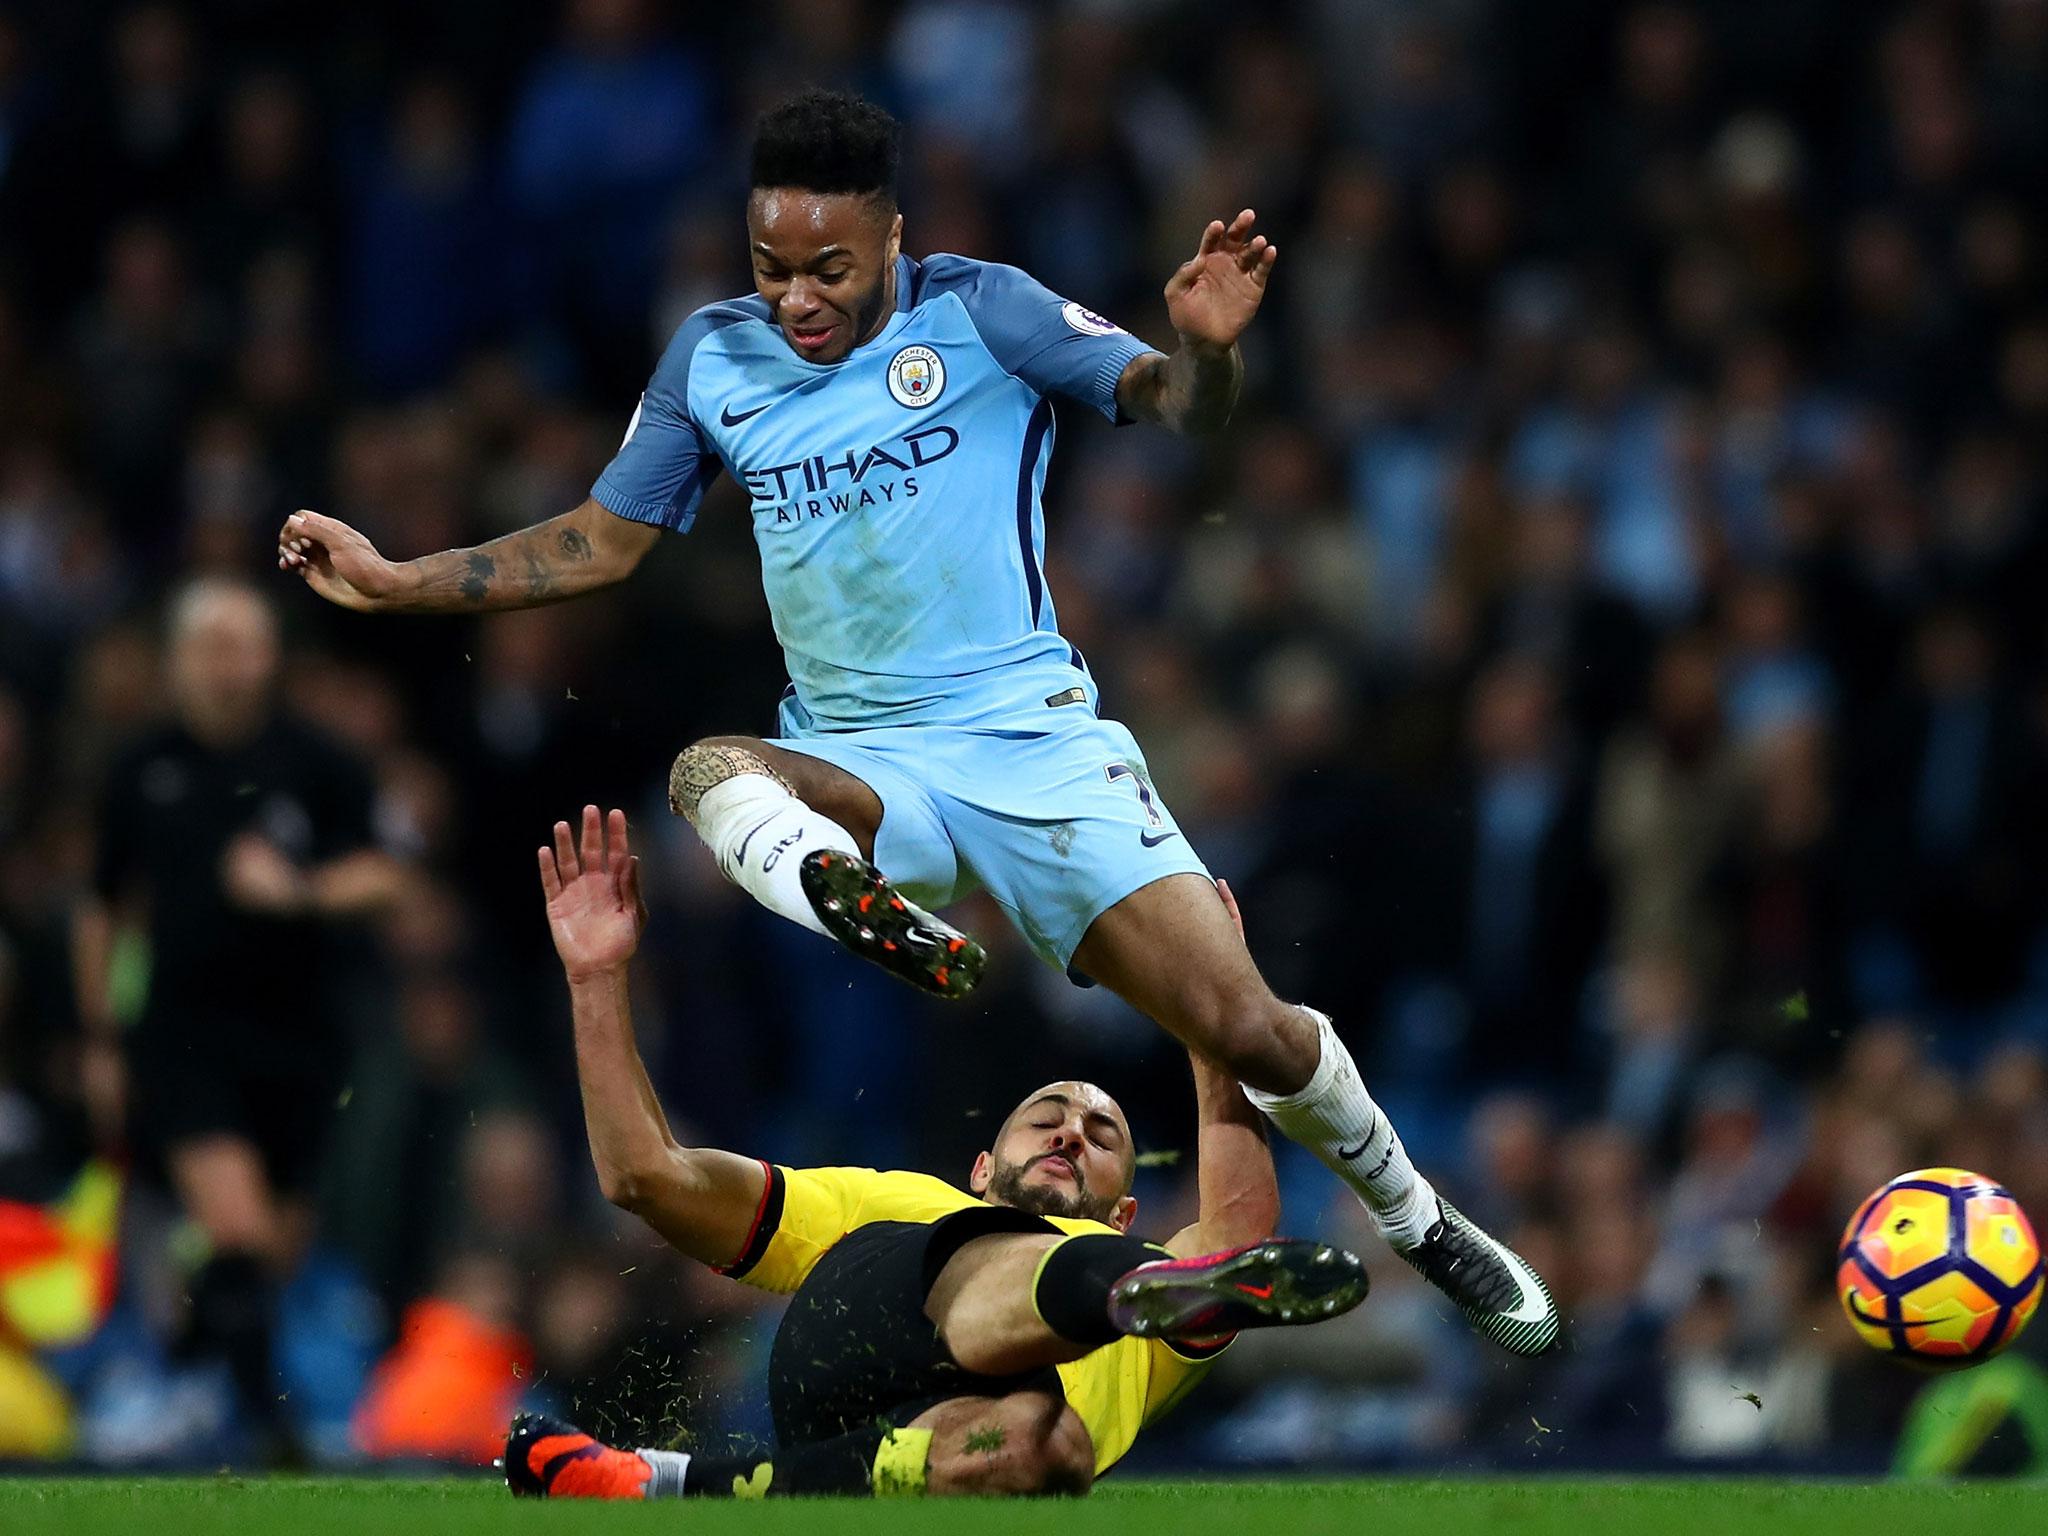 Sterling's winner came after a beautiful cross-field ball from De Bruyne